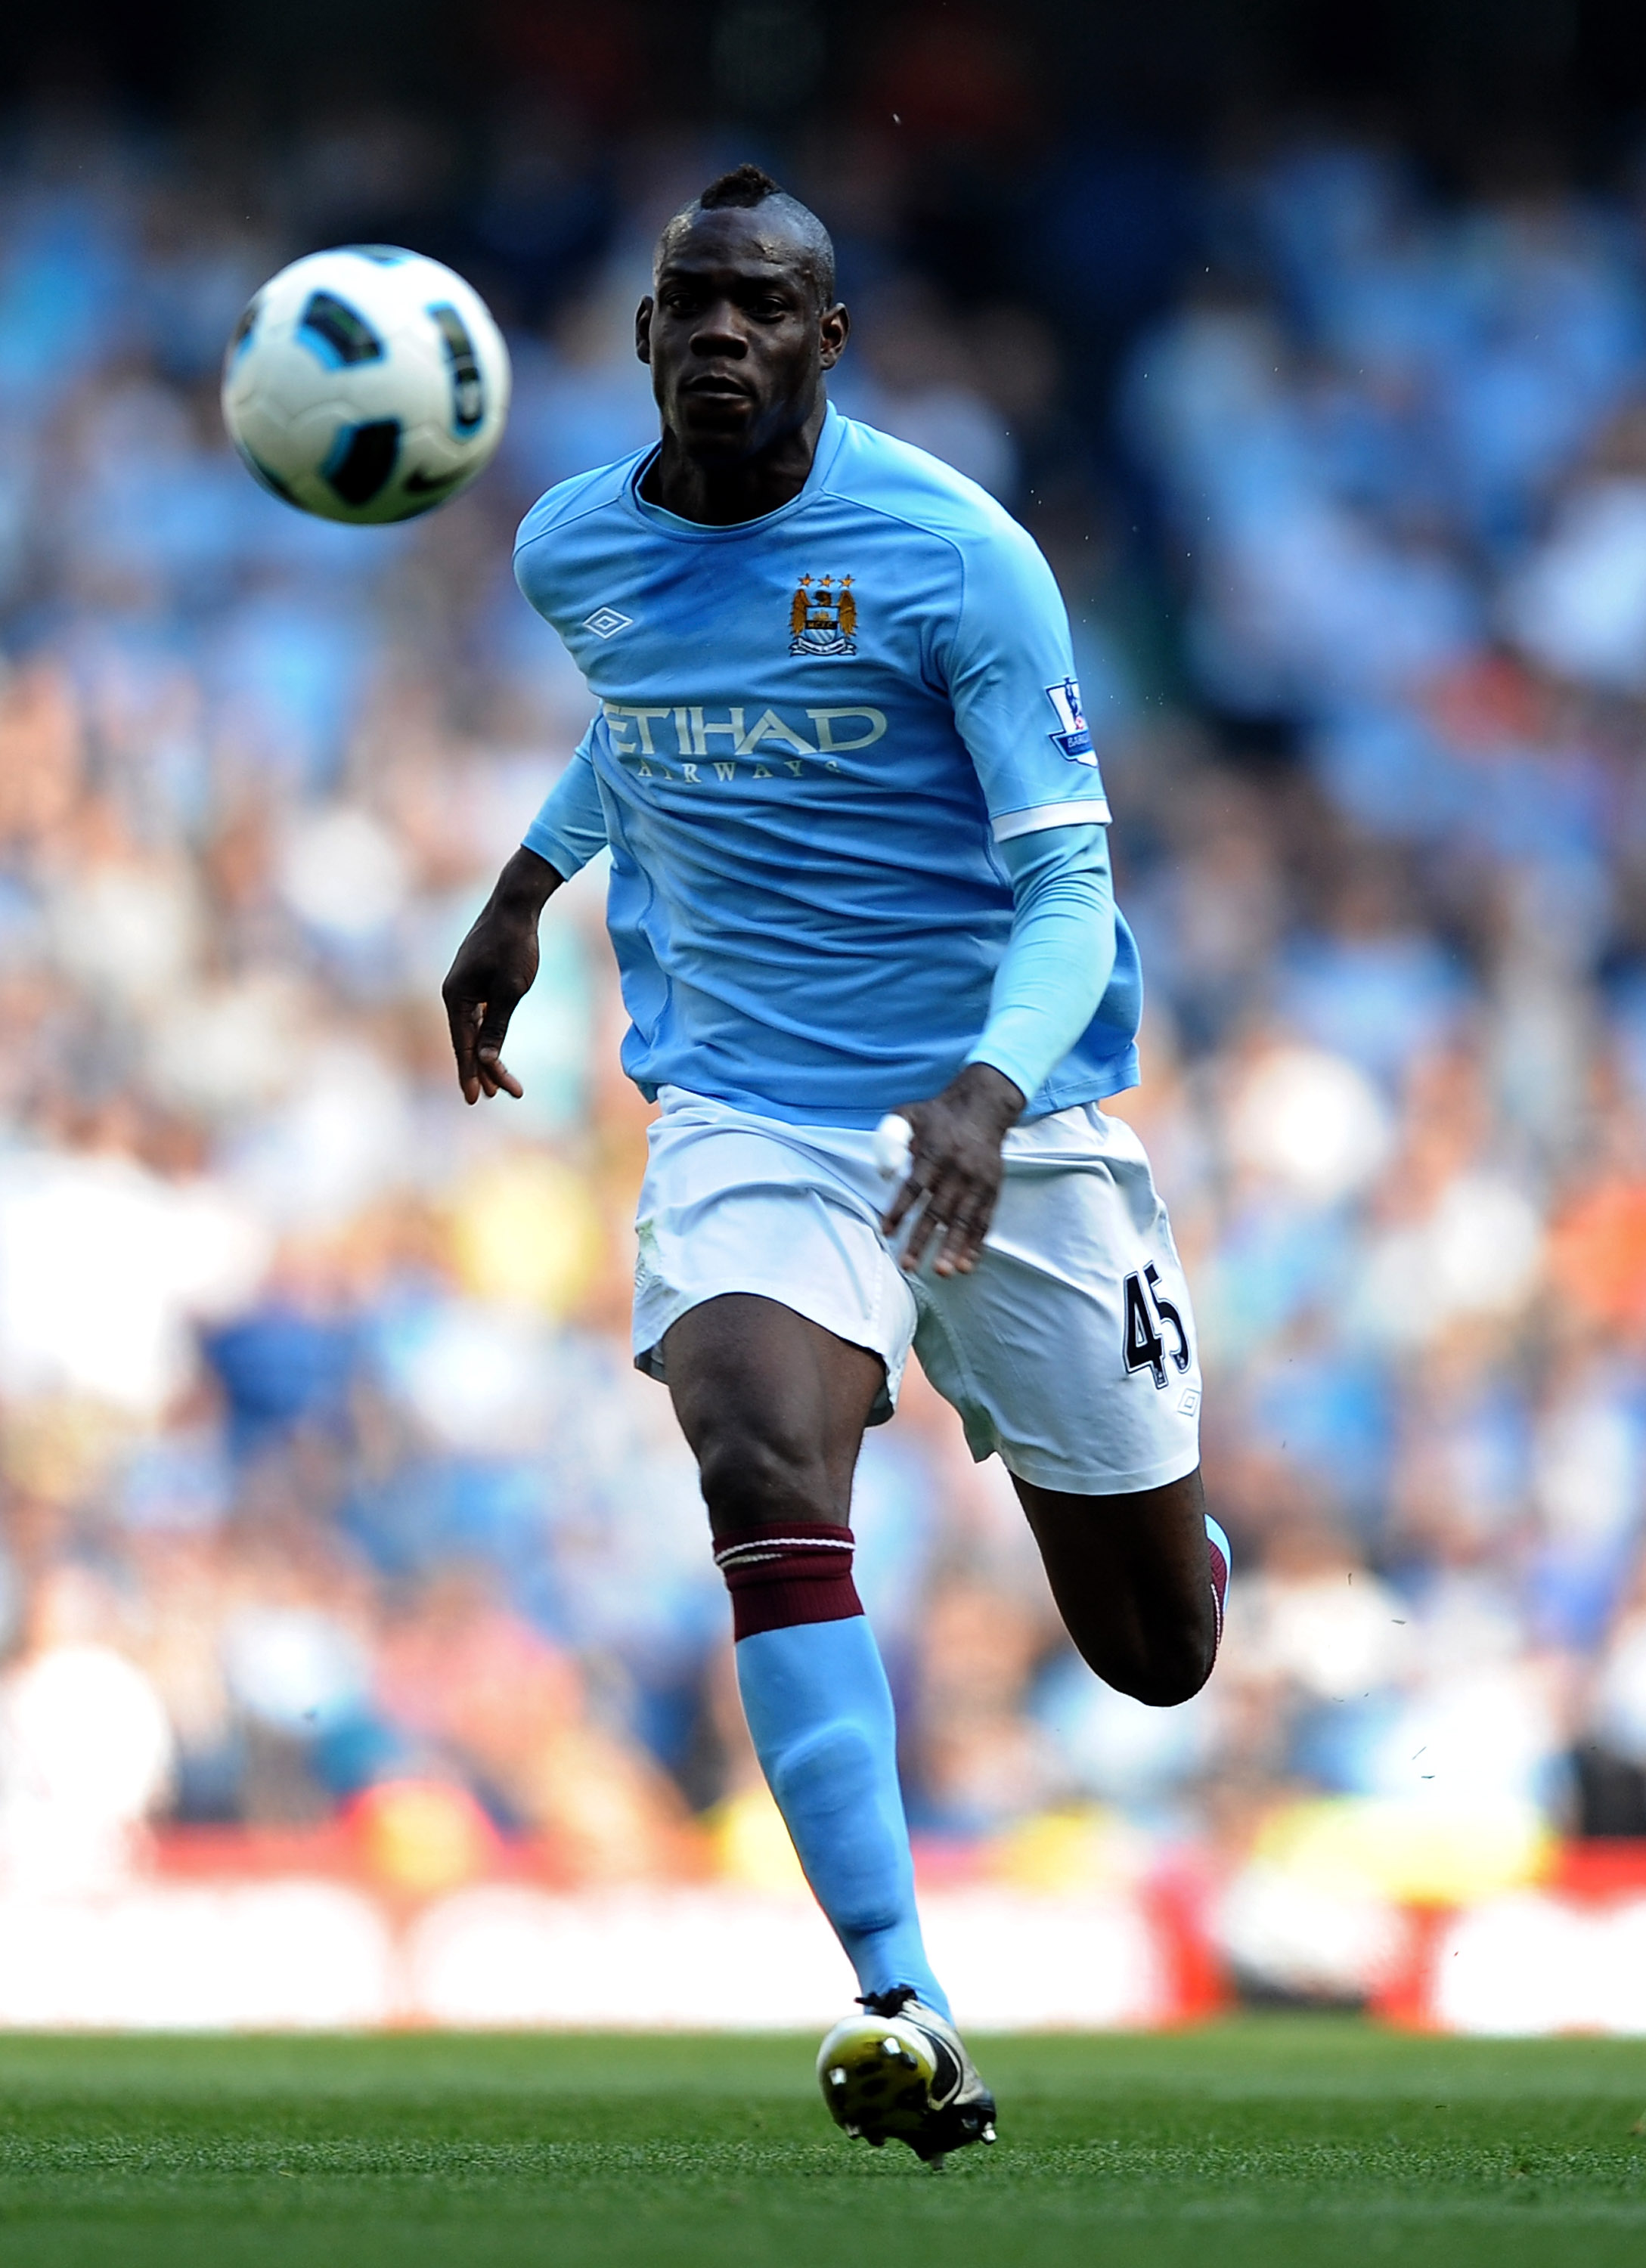 MANCHESTER, ENGLAND - MAY 01:  Mario Balotelli of Manchester City in action during the Barclays Premier League match between Manchester City and West Ham United at the City of Manchester Stadium on May 1, 2011 in Manchester, England. (Photo Laurence Griff